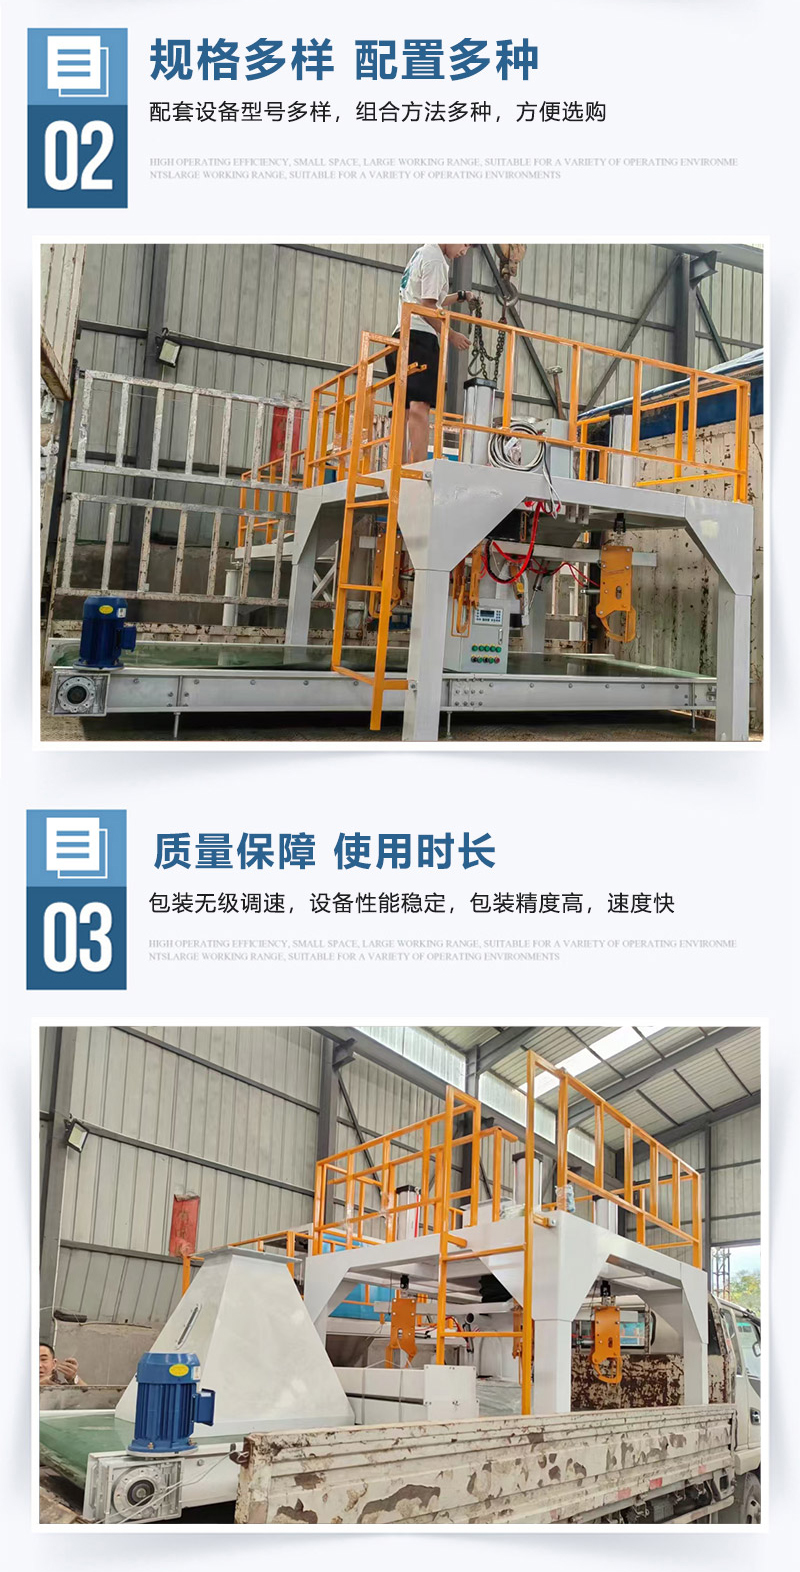 Fully automatic ton bag packaging machine Organic fertilizer grain ton packaging machine Fly ash large bag packaging scale with stable performance